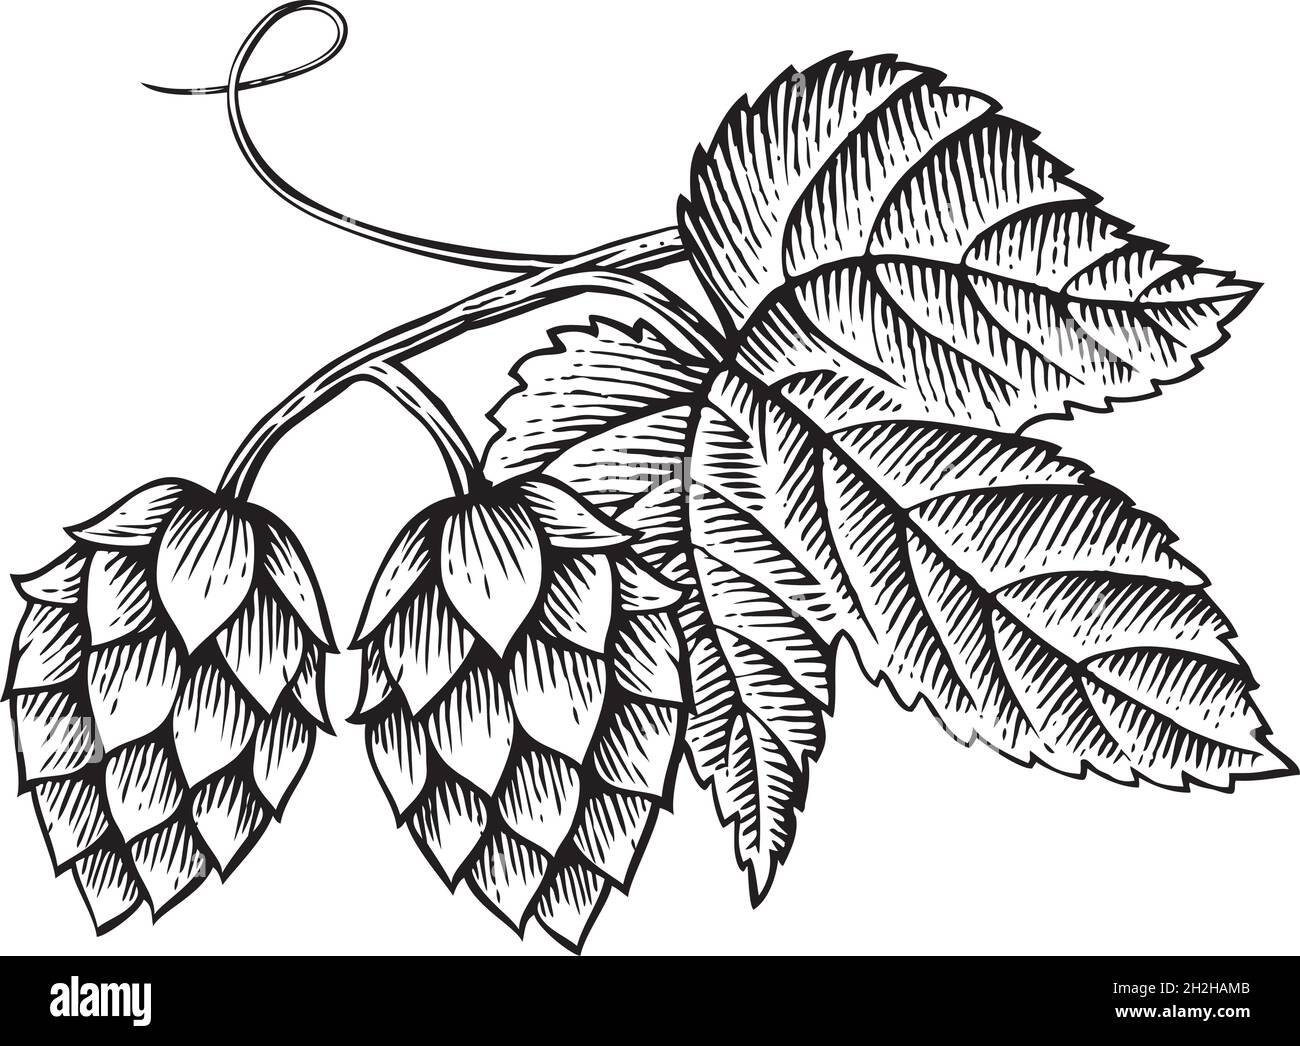 Hops icon with leaves vintage engraved vector illustration Stock Vector